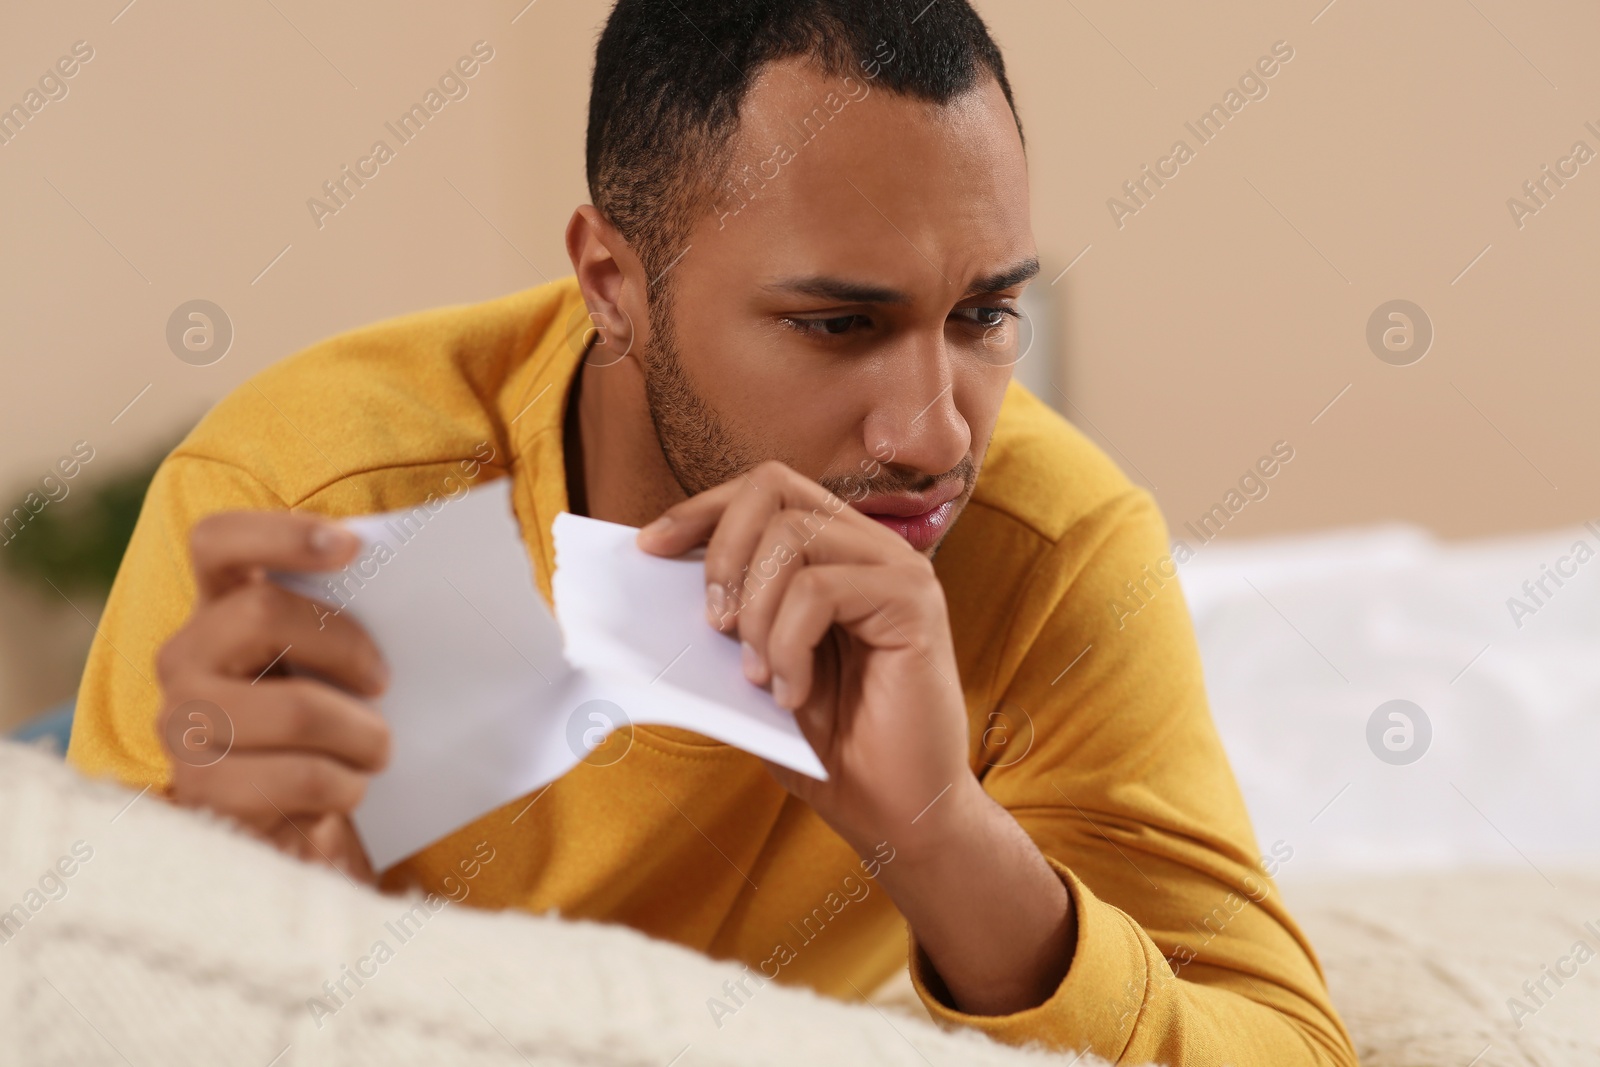 Photo of Upset African American man with torn photo indoors. Divorce concept